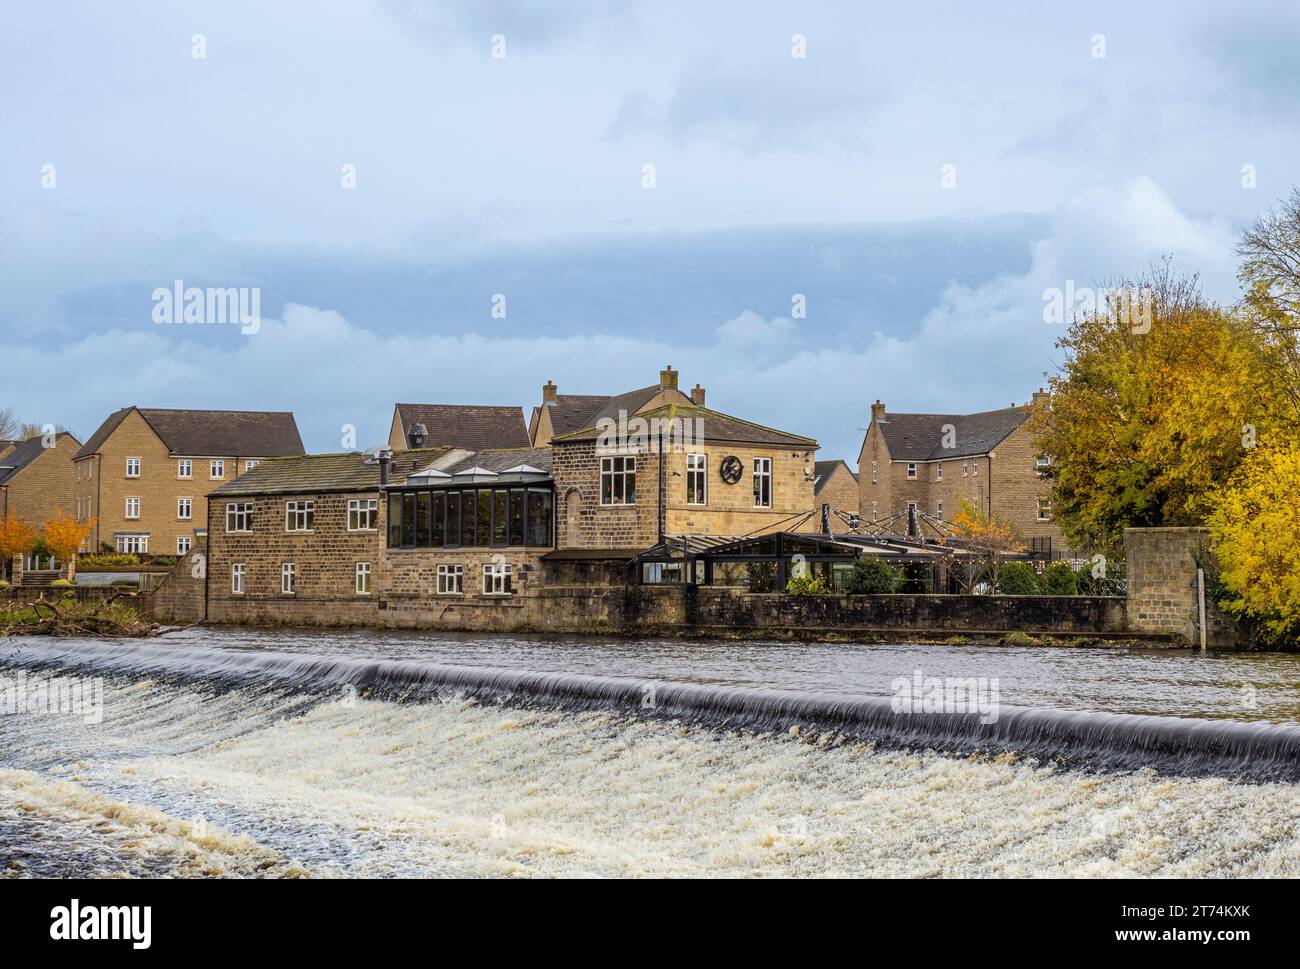 Weir on the River Wharfe in Otley, with Buon Apps restaurant seen in Autumn Stock Photo